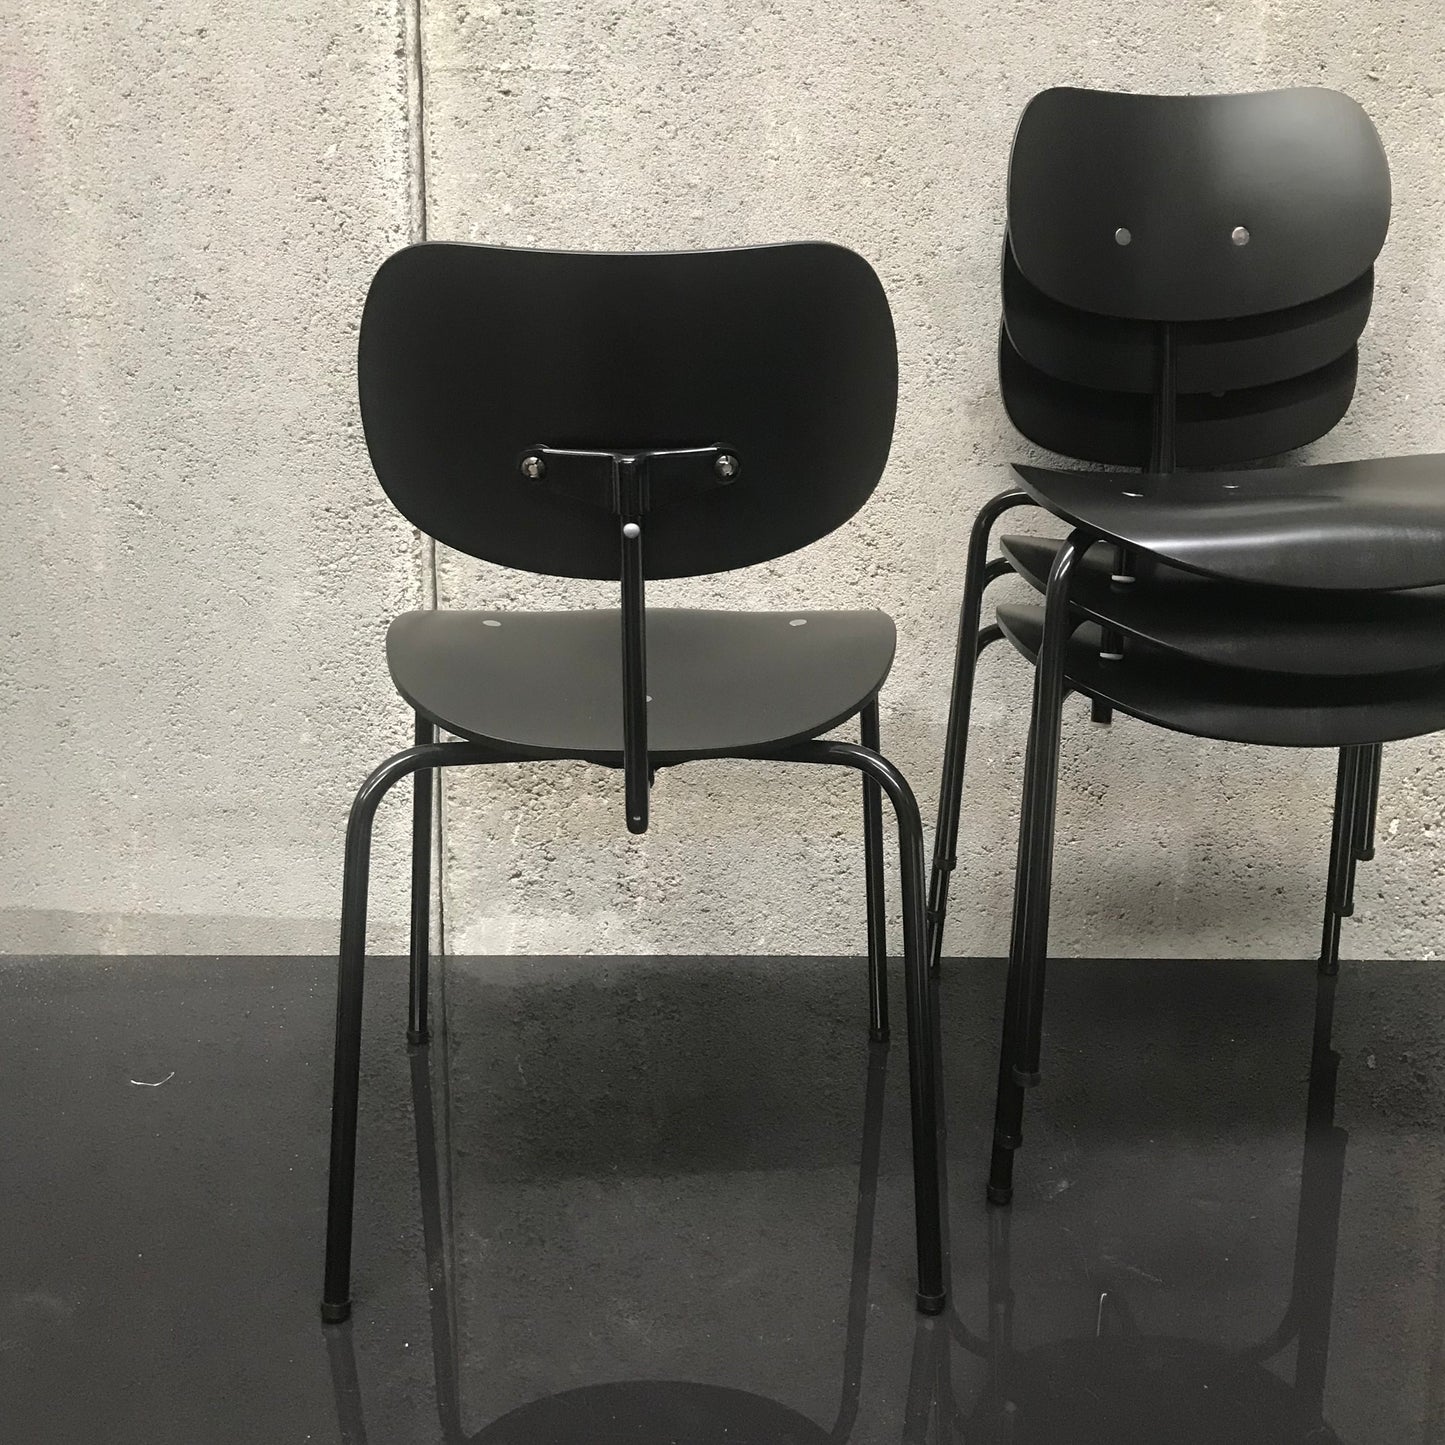 Set of FOUR SE 68 Multi-Purpose Chair by Wilde + Spieth with Black Base & Seat